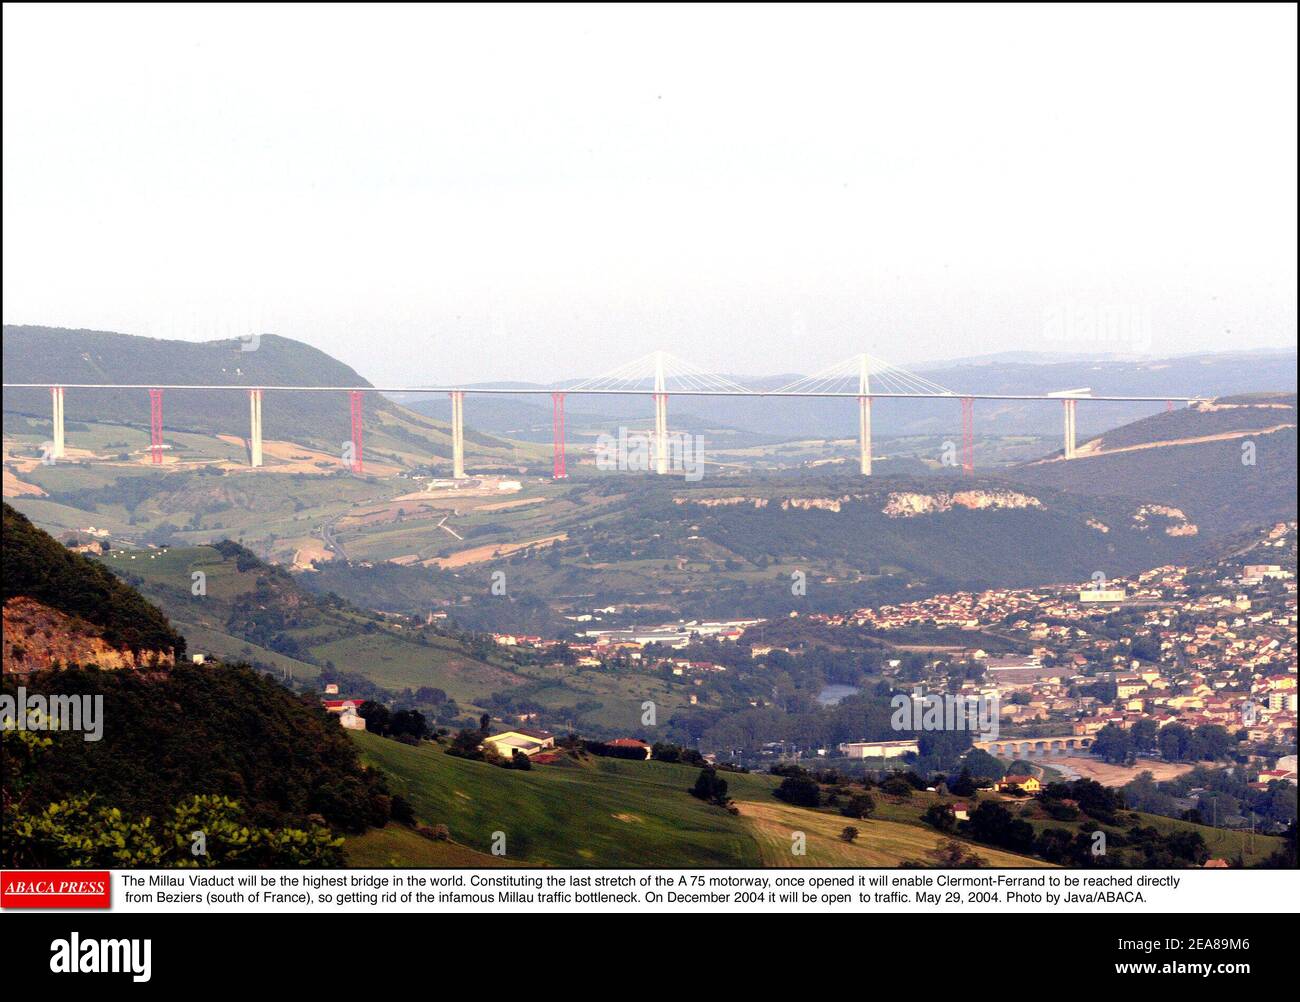 The Millau Viaduct will be the highest bridge in the world. Constituting the last stretch of the A 75 motorway, once opened it will enable Clermont-Ferrand to be reached directly from Beziers (south of France), so getting rid of the infamous Millau traffic bottleneck. On December 2004 it will be open to traffic. May 29, 2004. Photo by Java/ABACA. Stock Photo